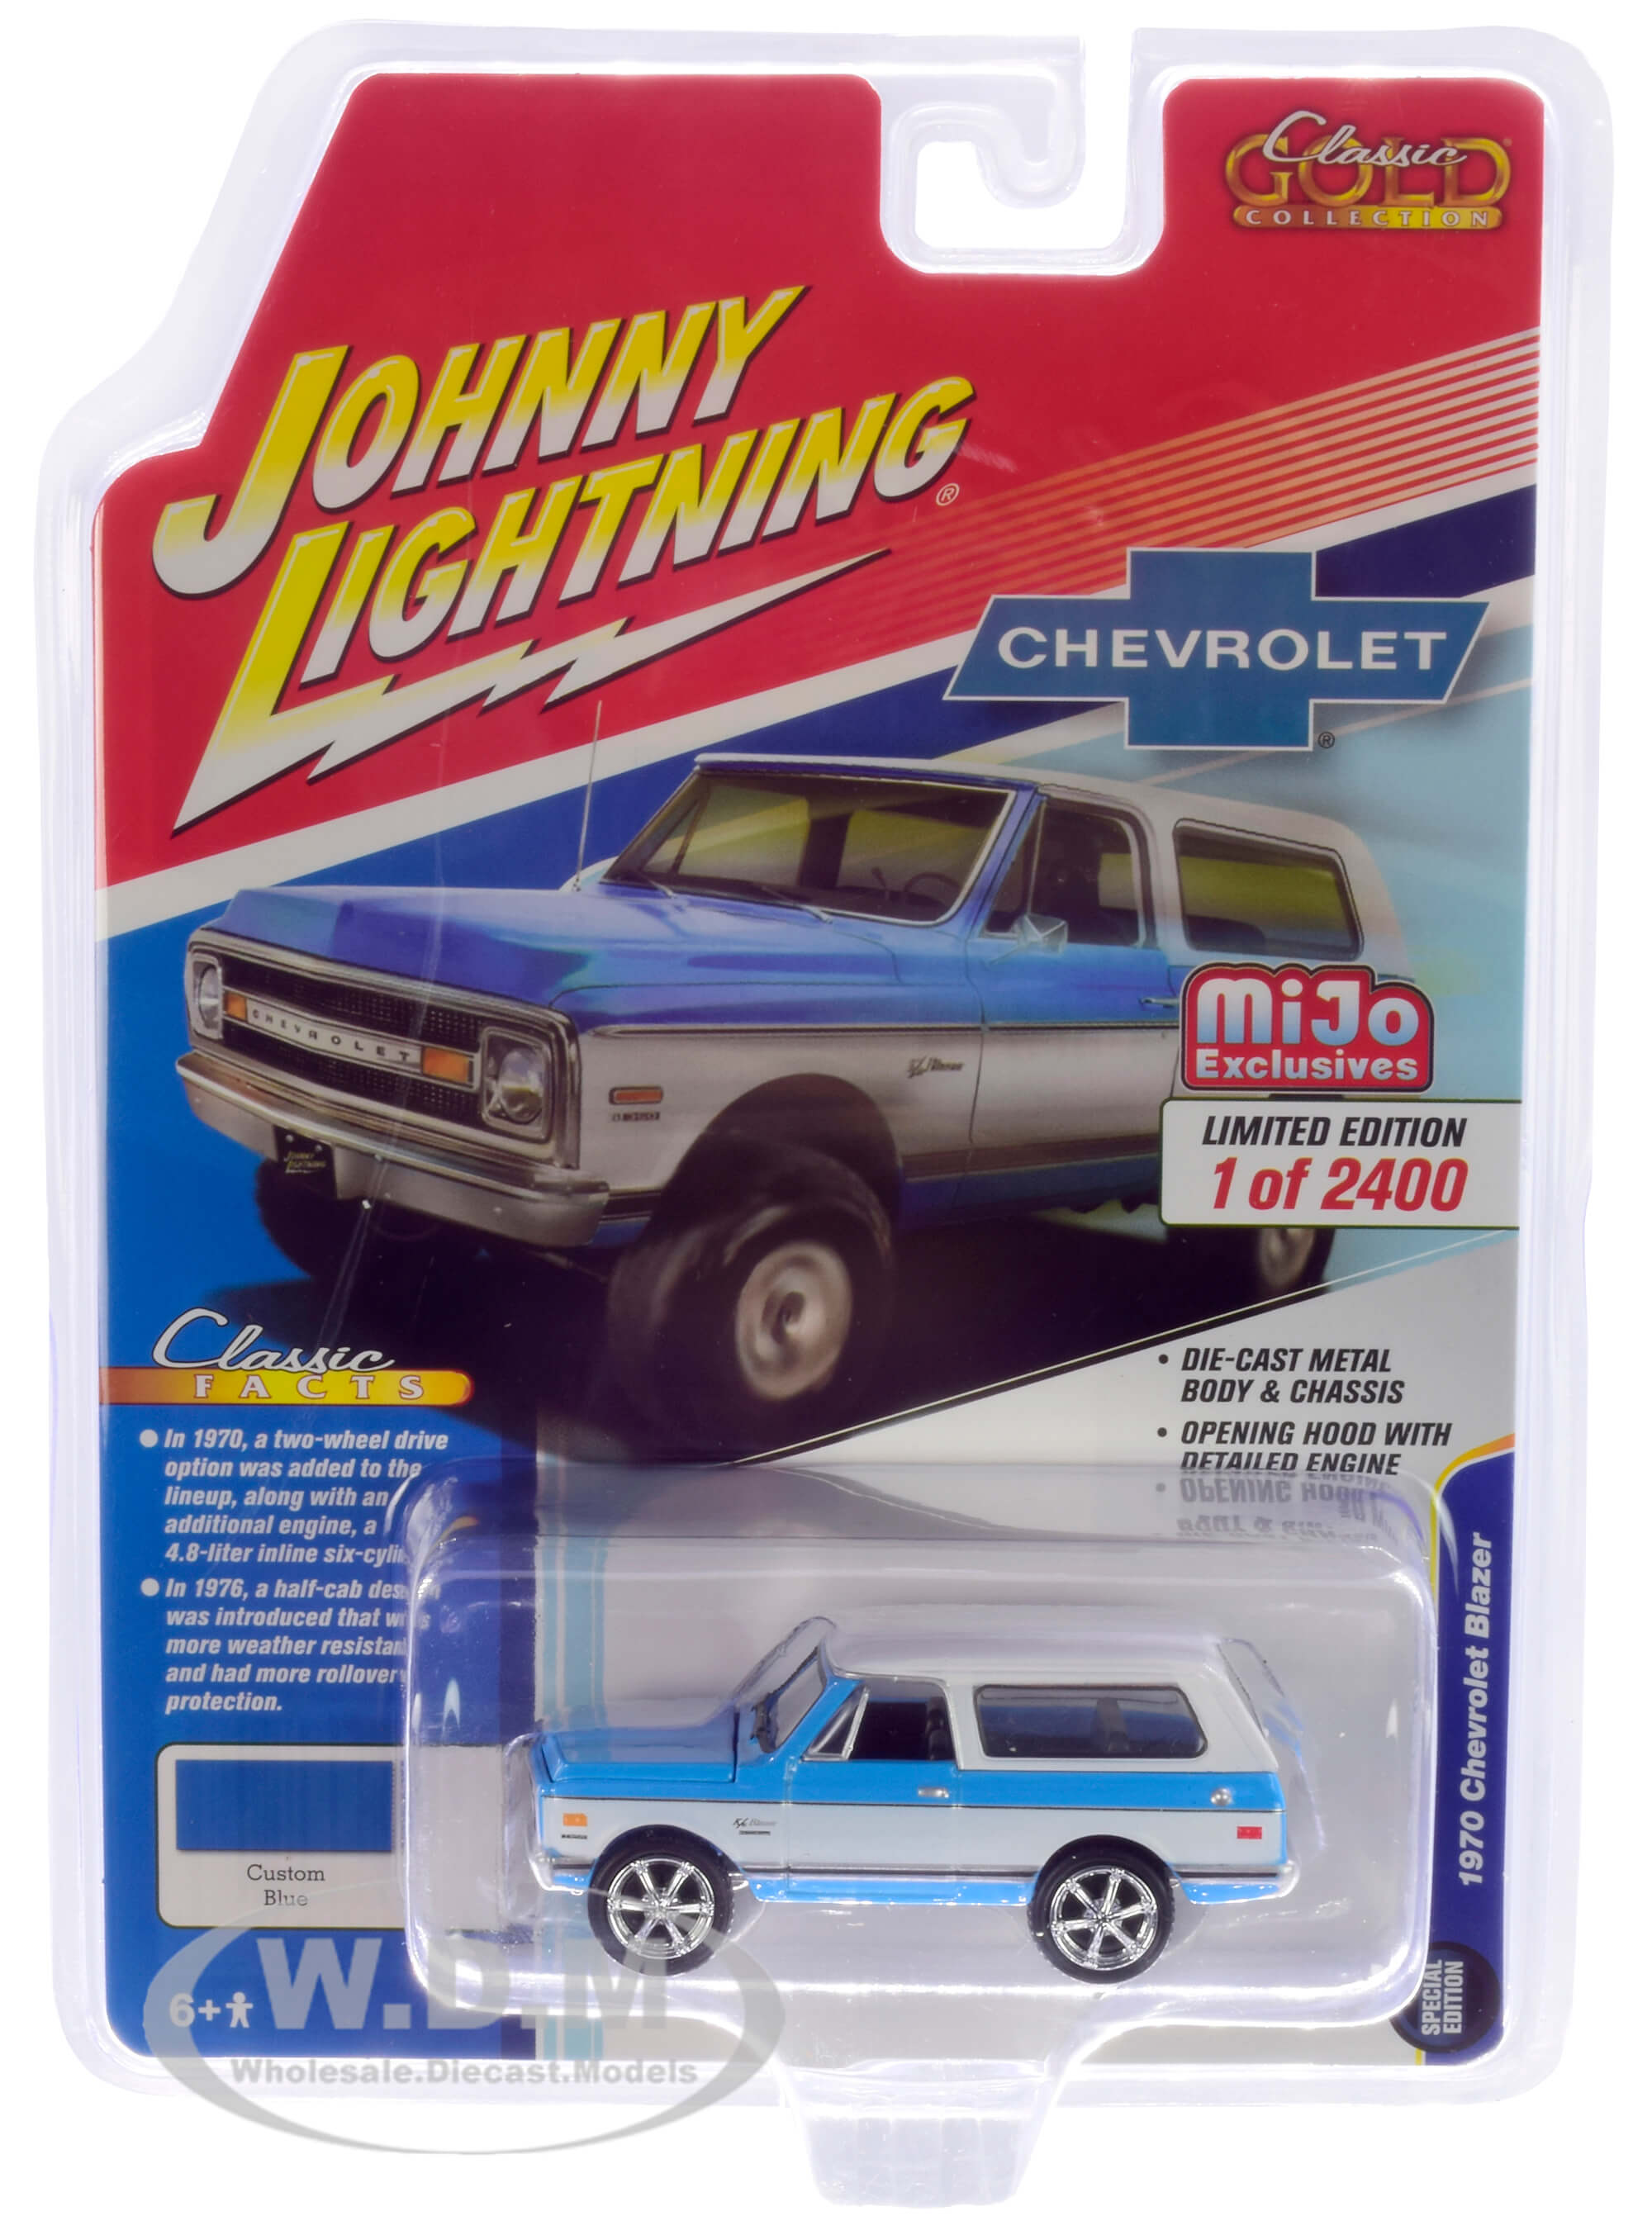 1970 Chevrolet Blazer Custom Blue And White Limited Edition To 2400 Pieces Worldwide 1/64 Diecast Model Car By Johnny Lightning